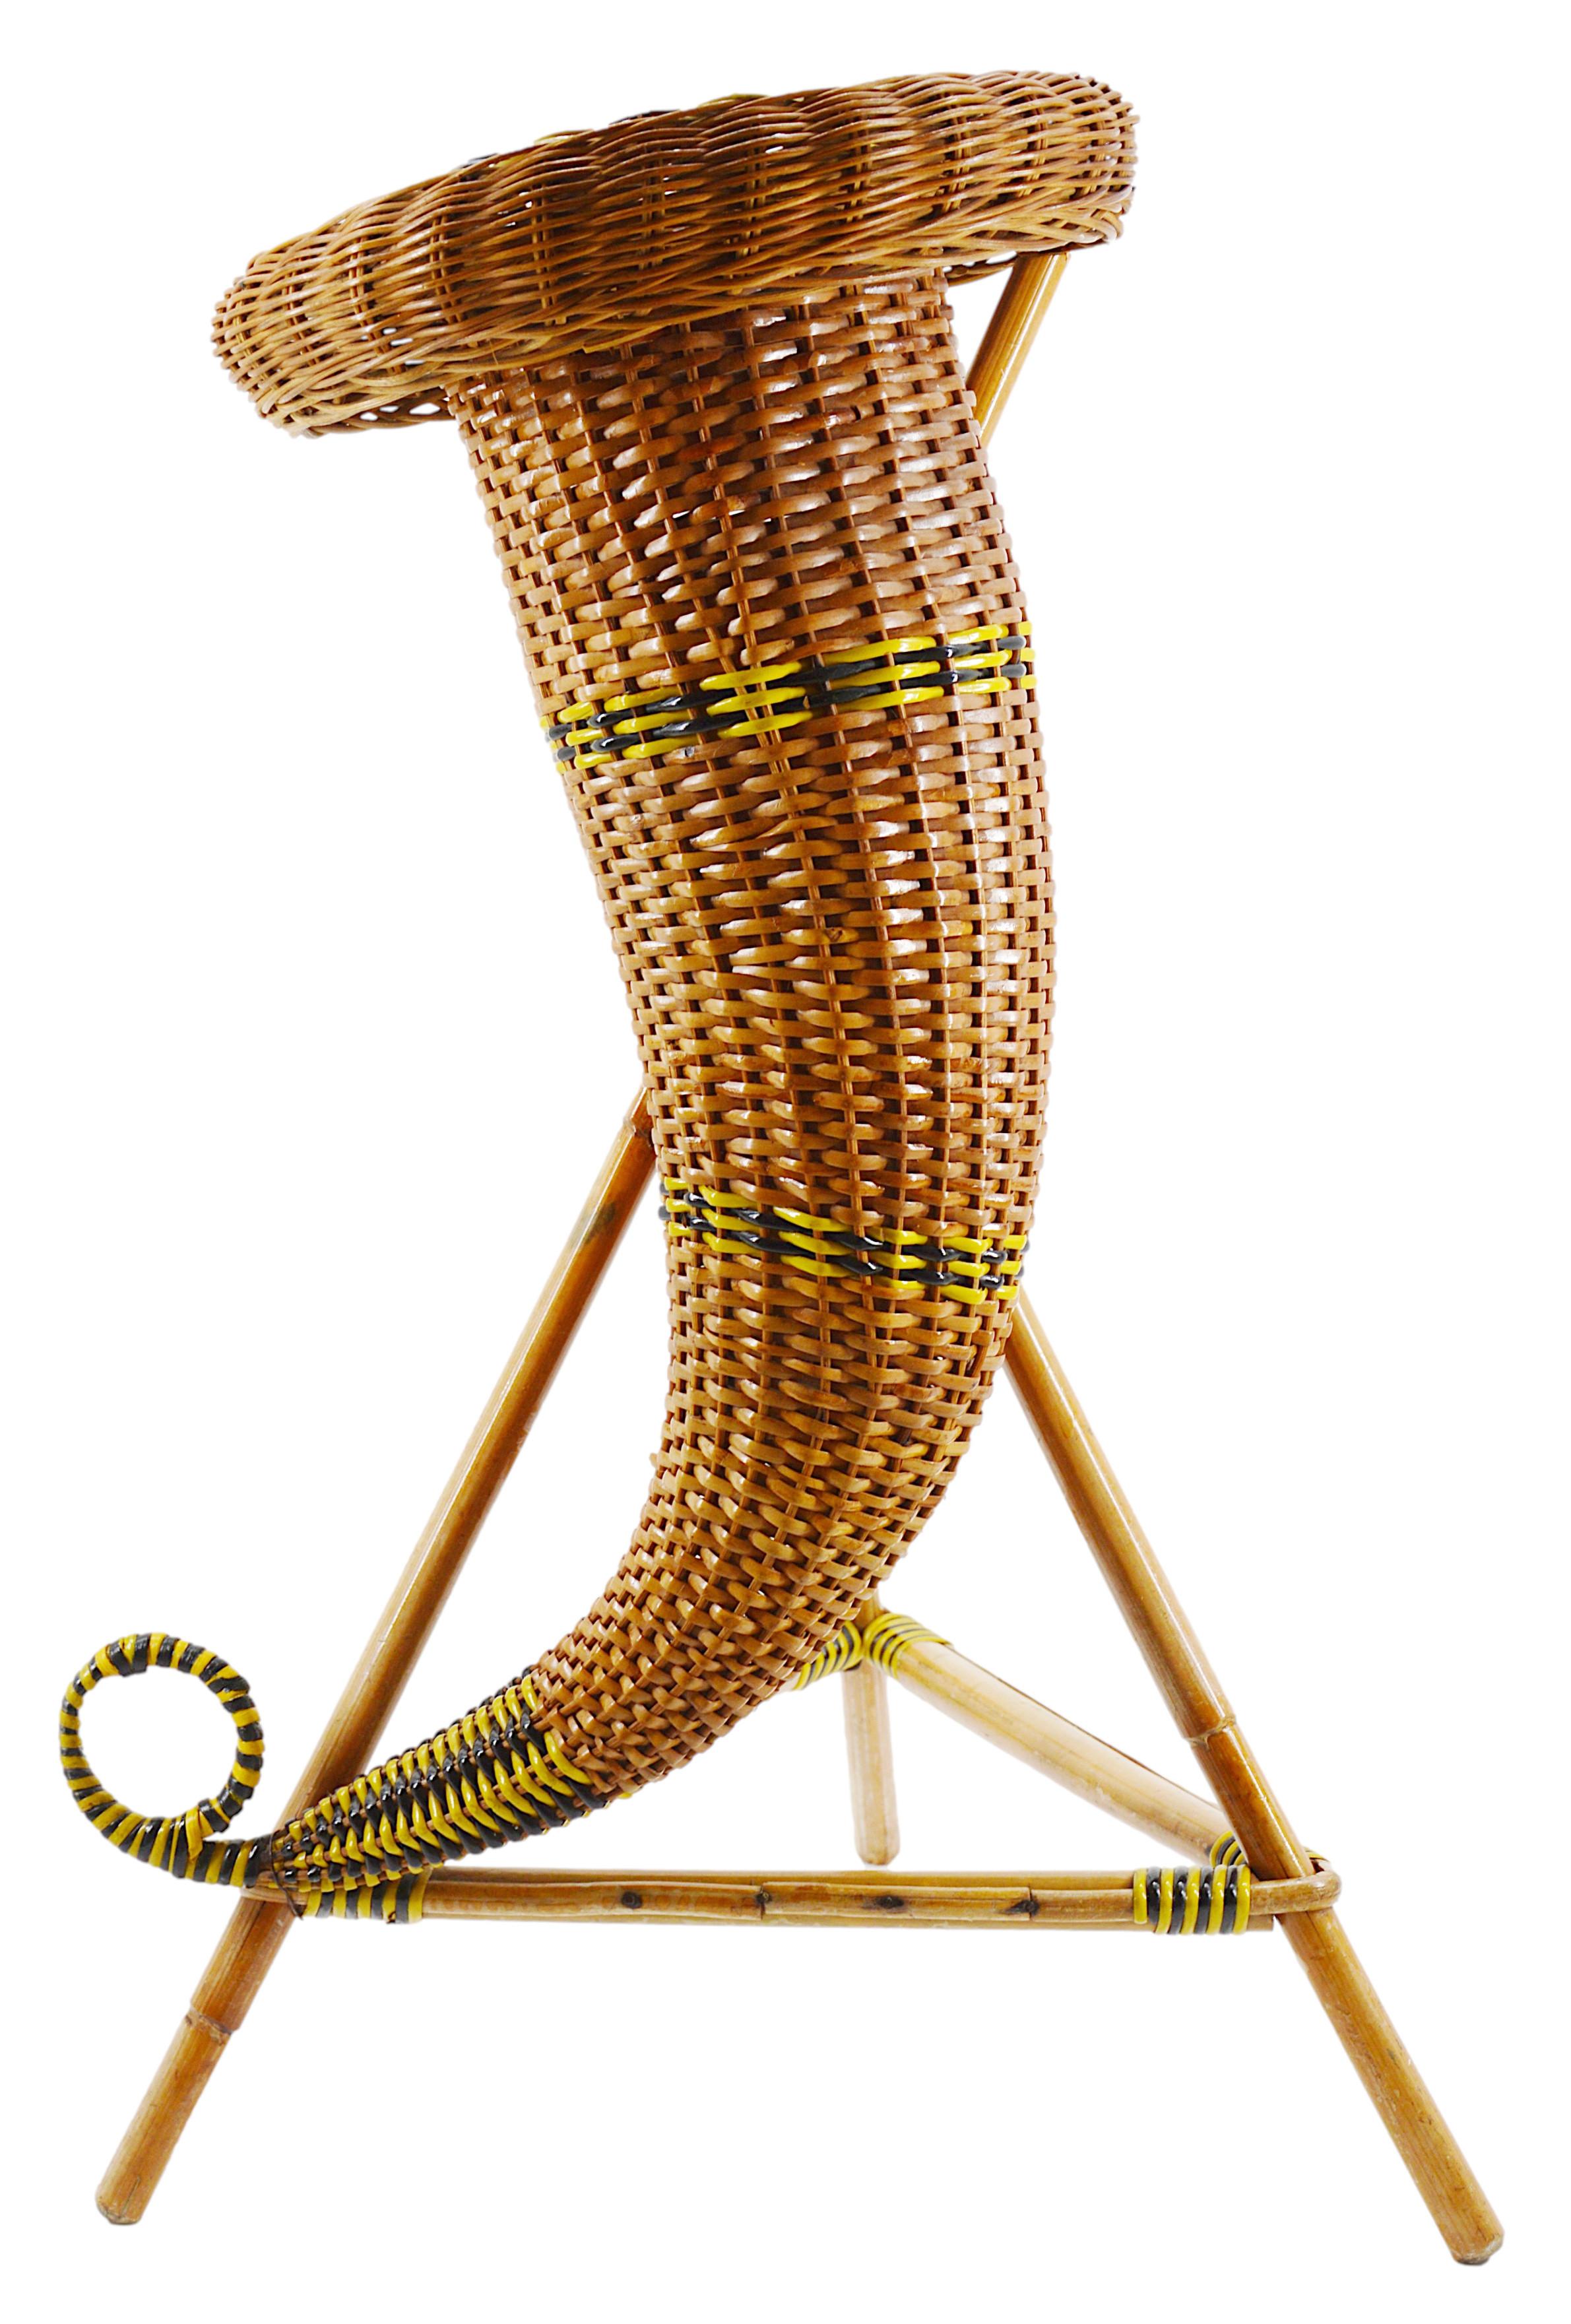 Bamboo & rattan plant stand, France, Early 20th century. Black & yellow. Measures: Height : 32.5